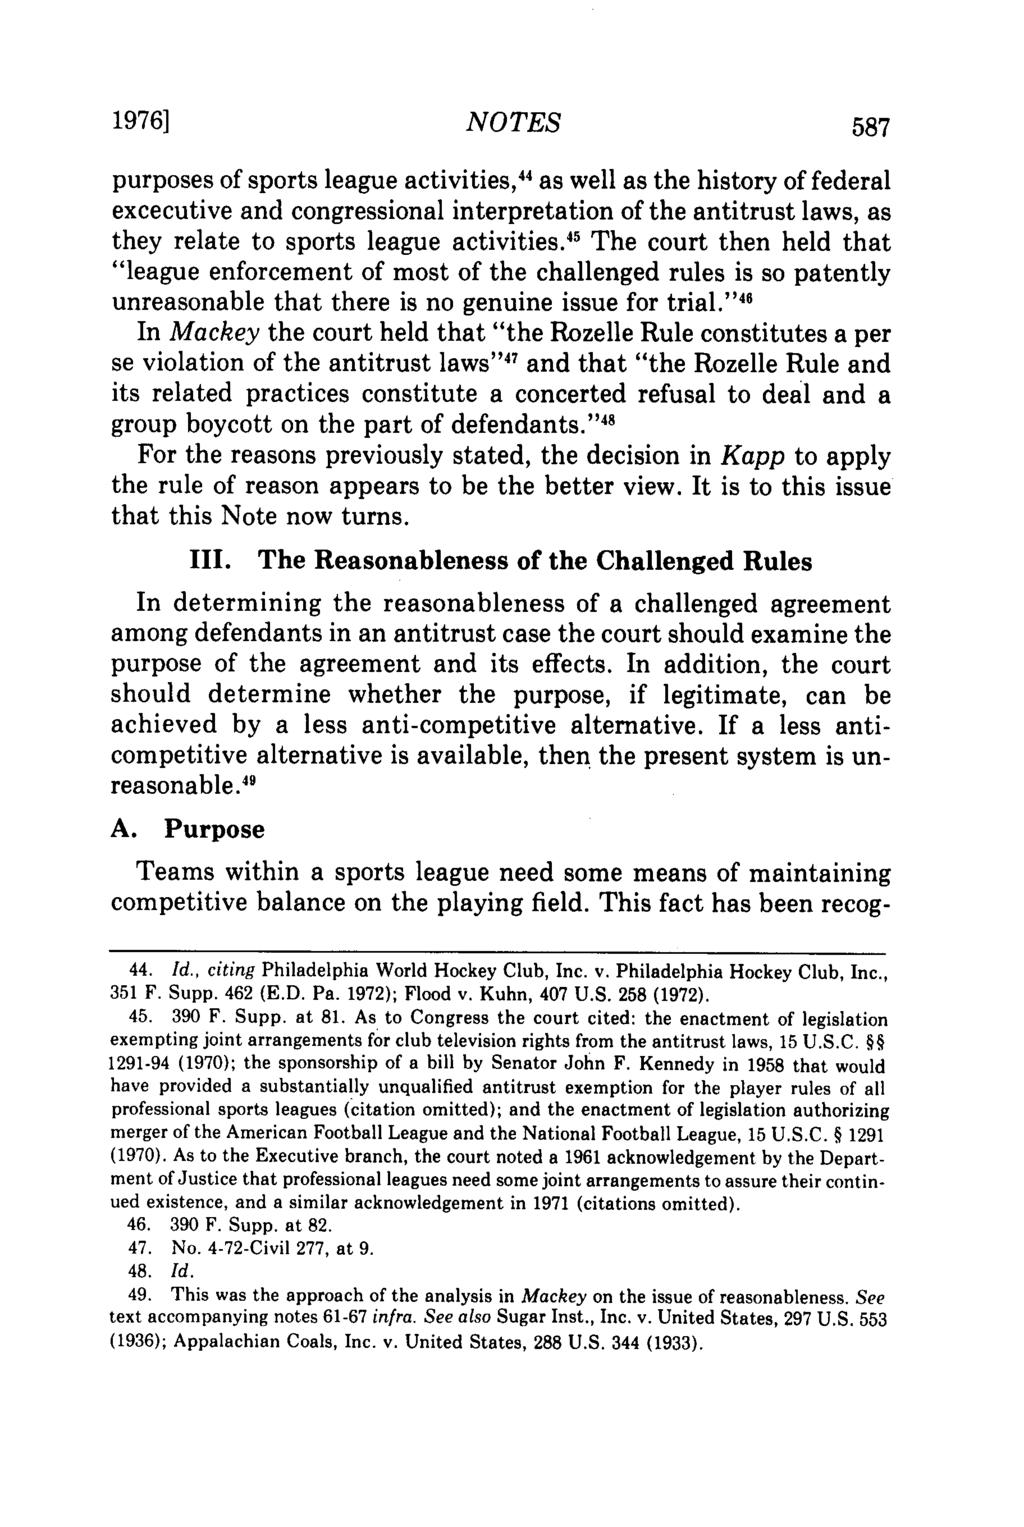 1976] NOTES purposes of sports league activities," as well as the history of federal excecutive and congressional interpretation of the antitrust laws, as they relate to sports league activities.